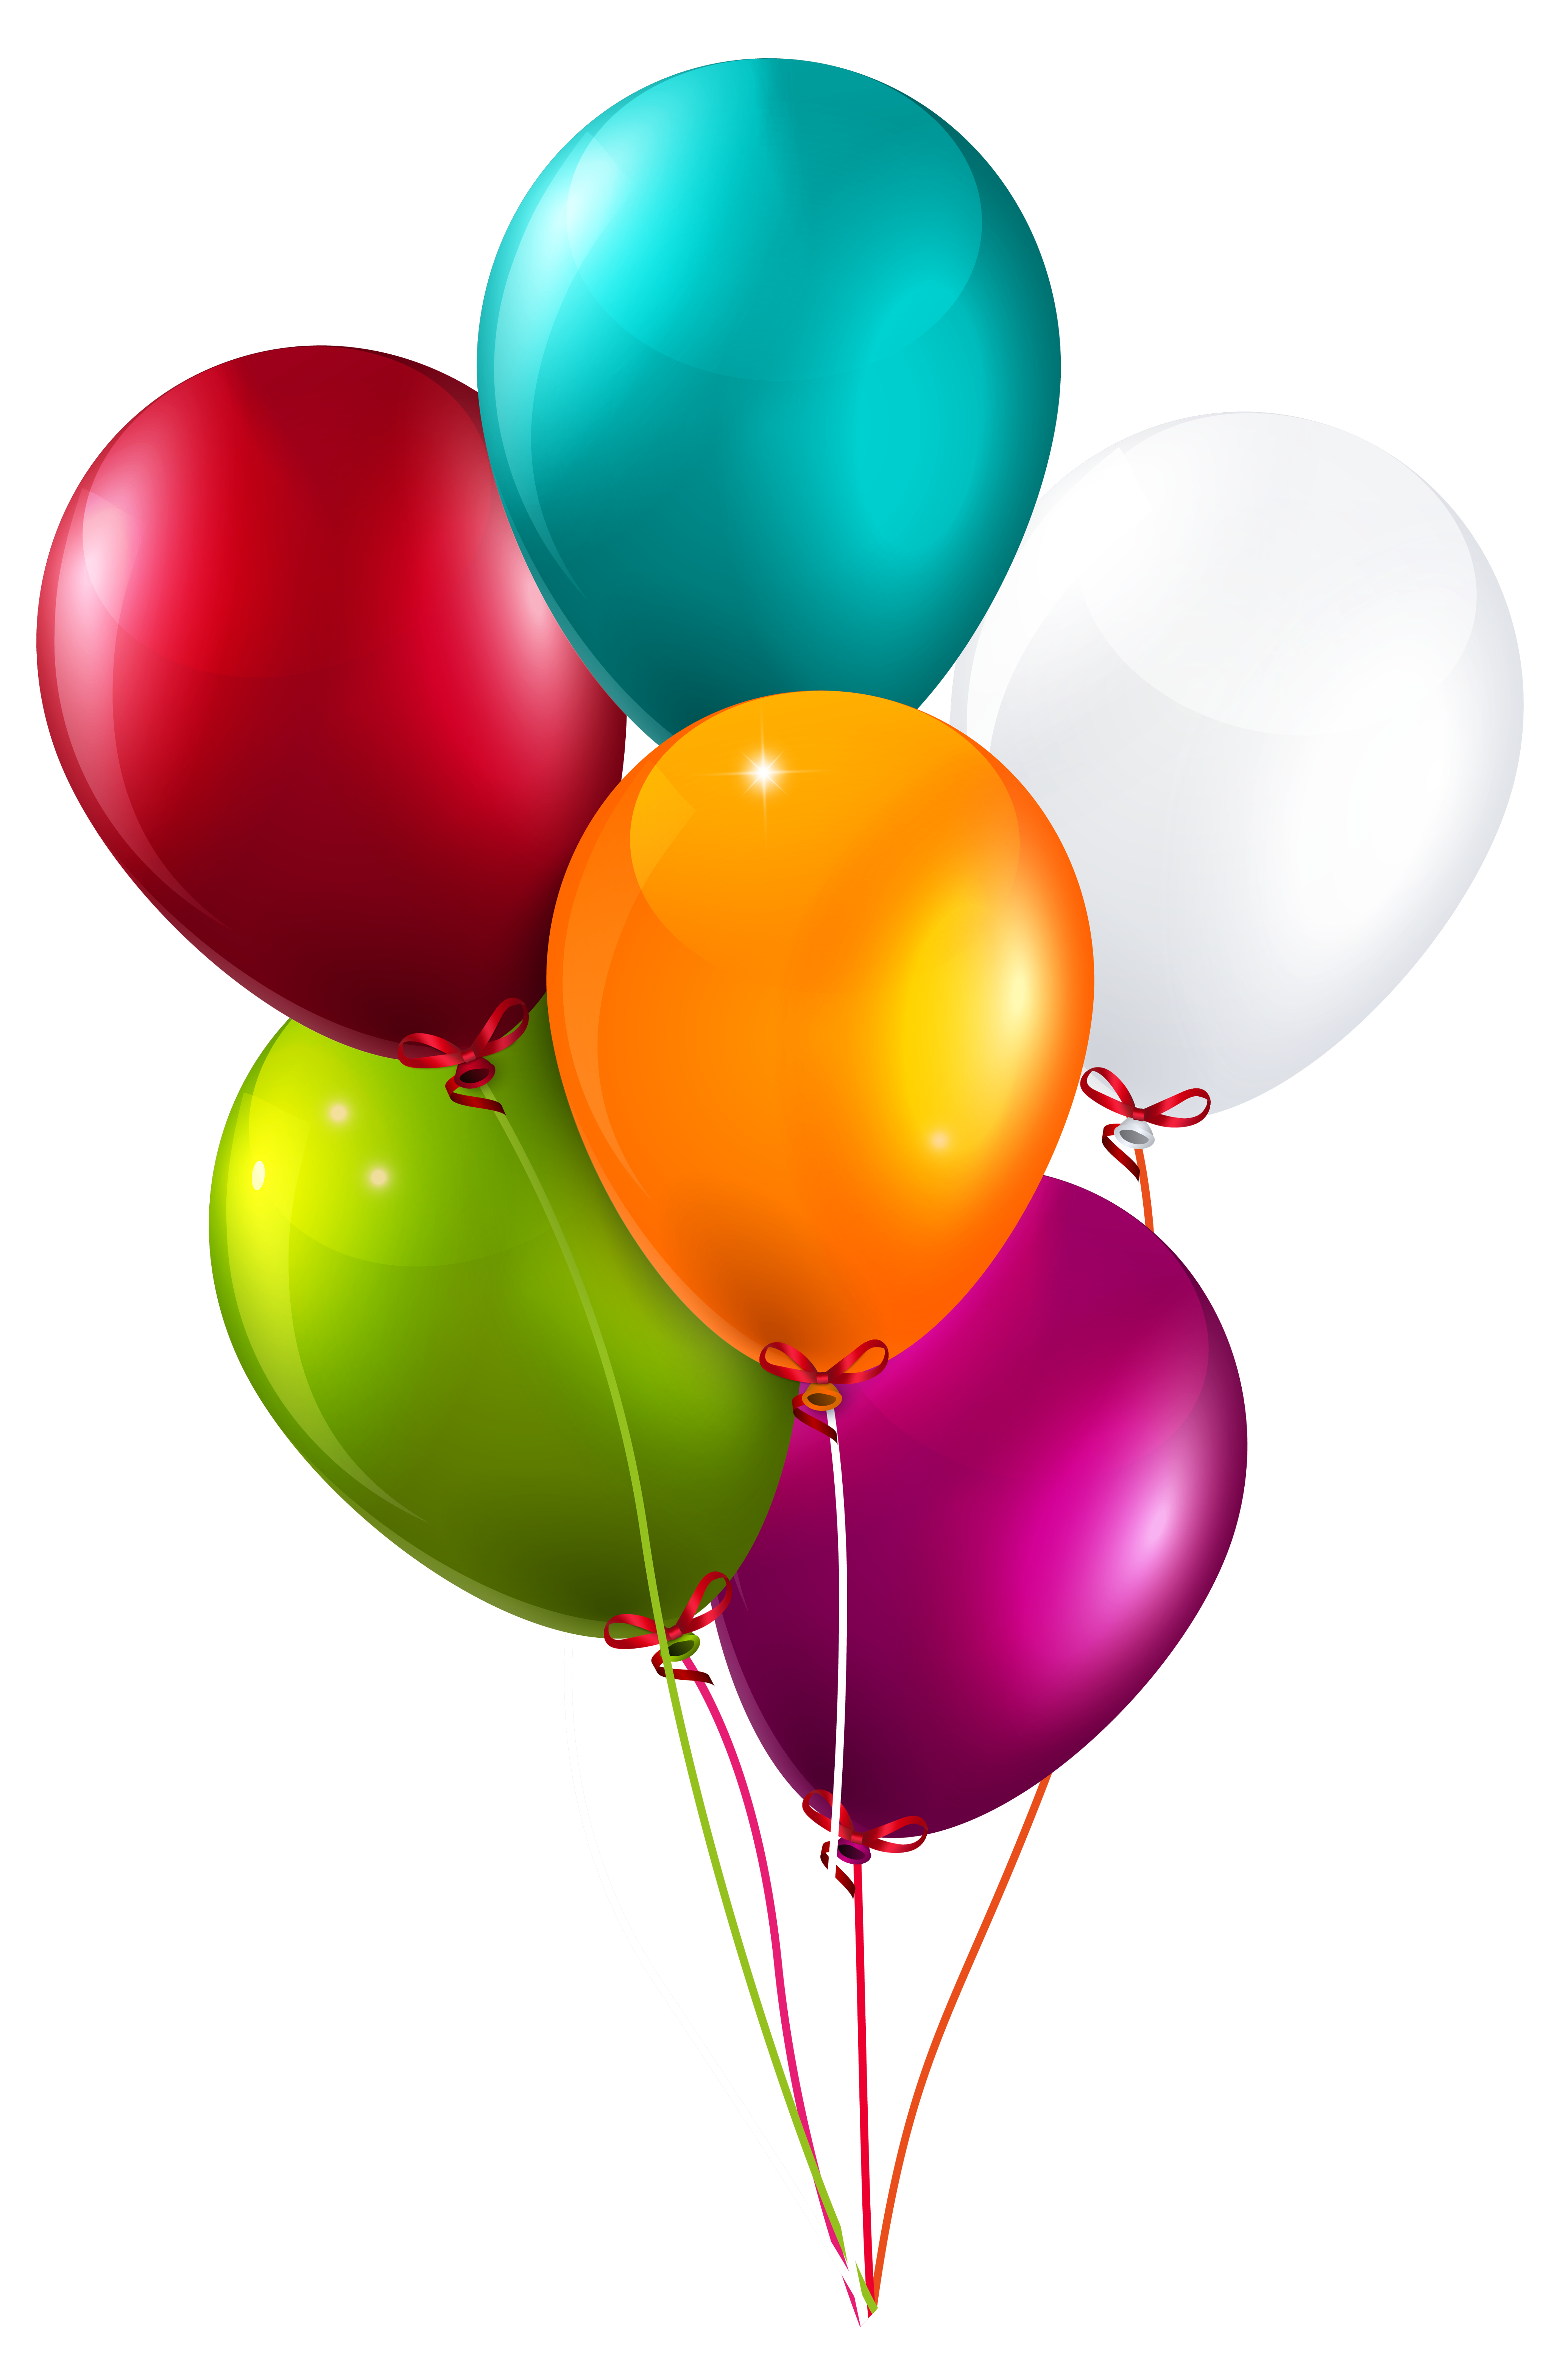 Colorful Balloons Bunch Large PNG Clipart Image | Gallery ...